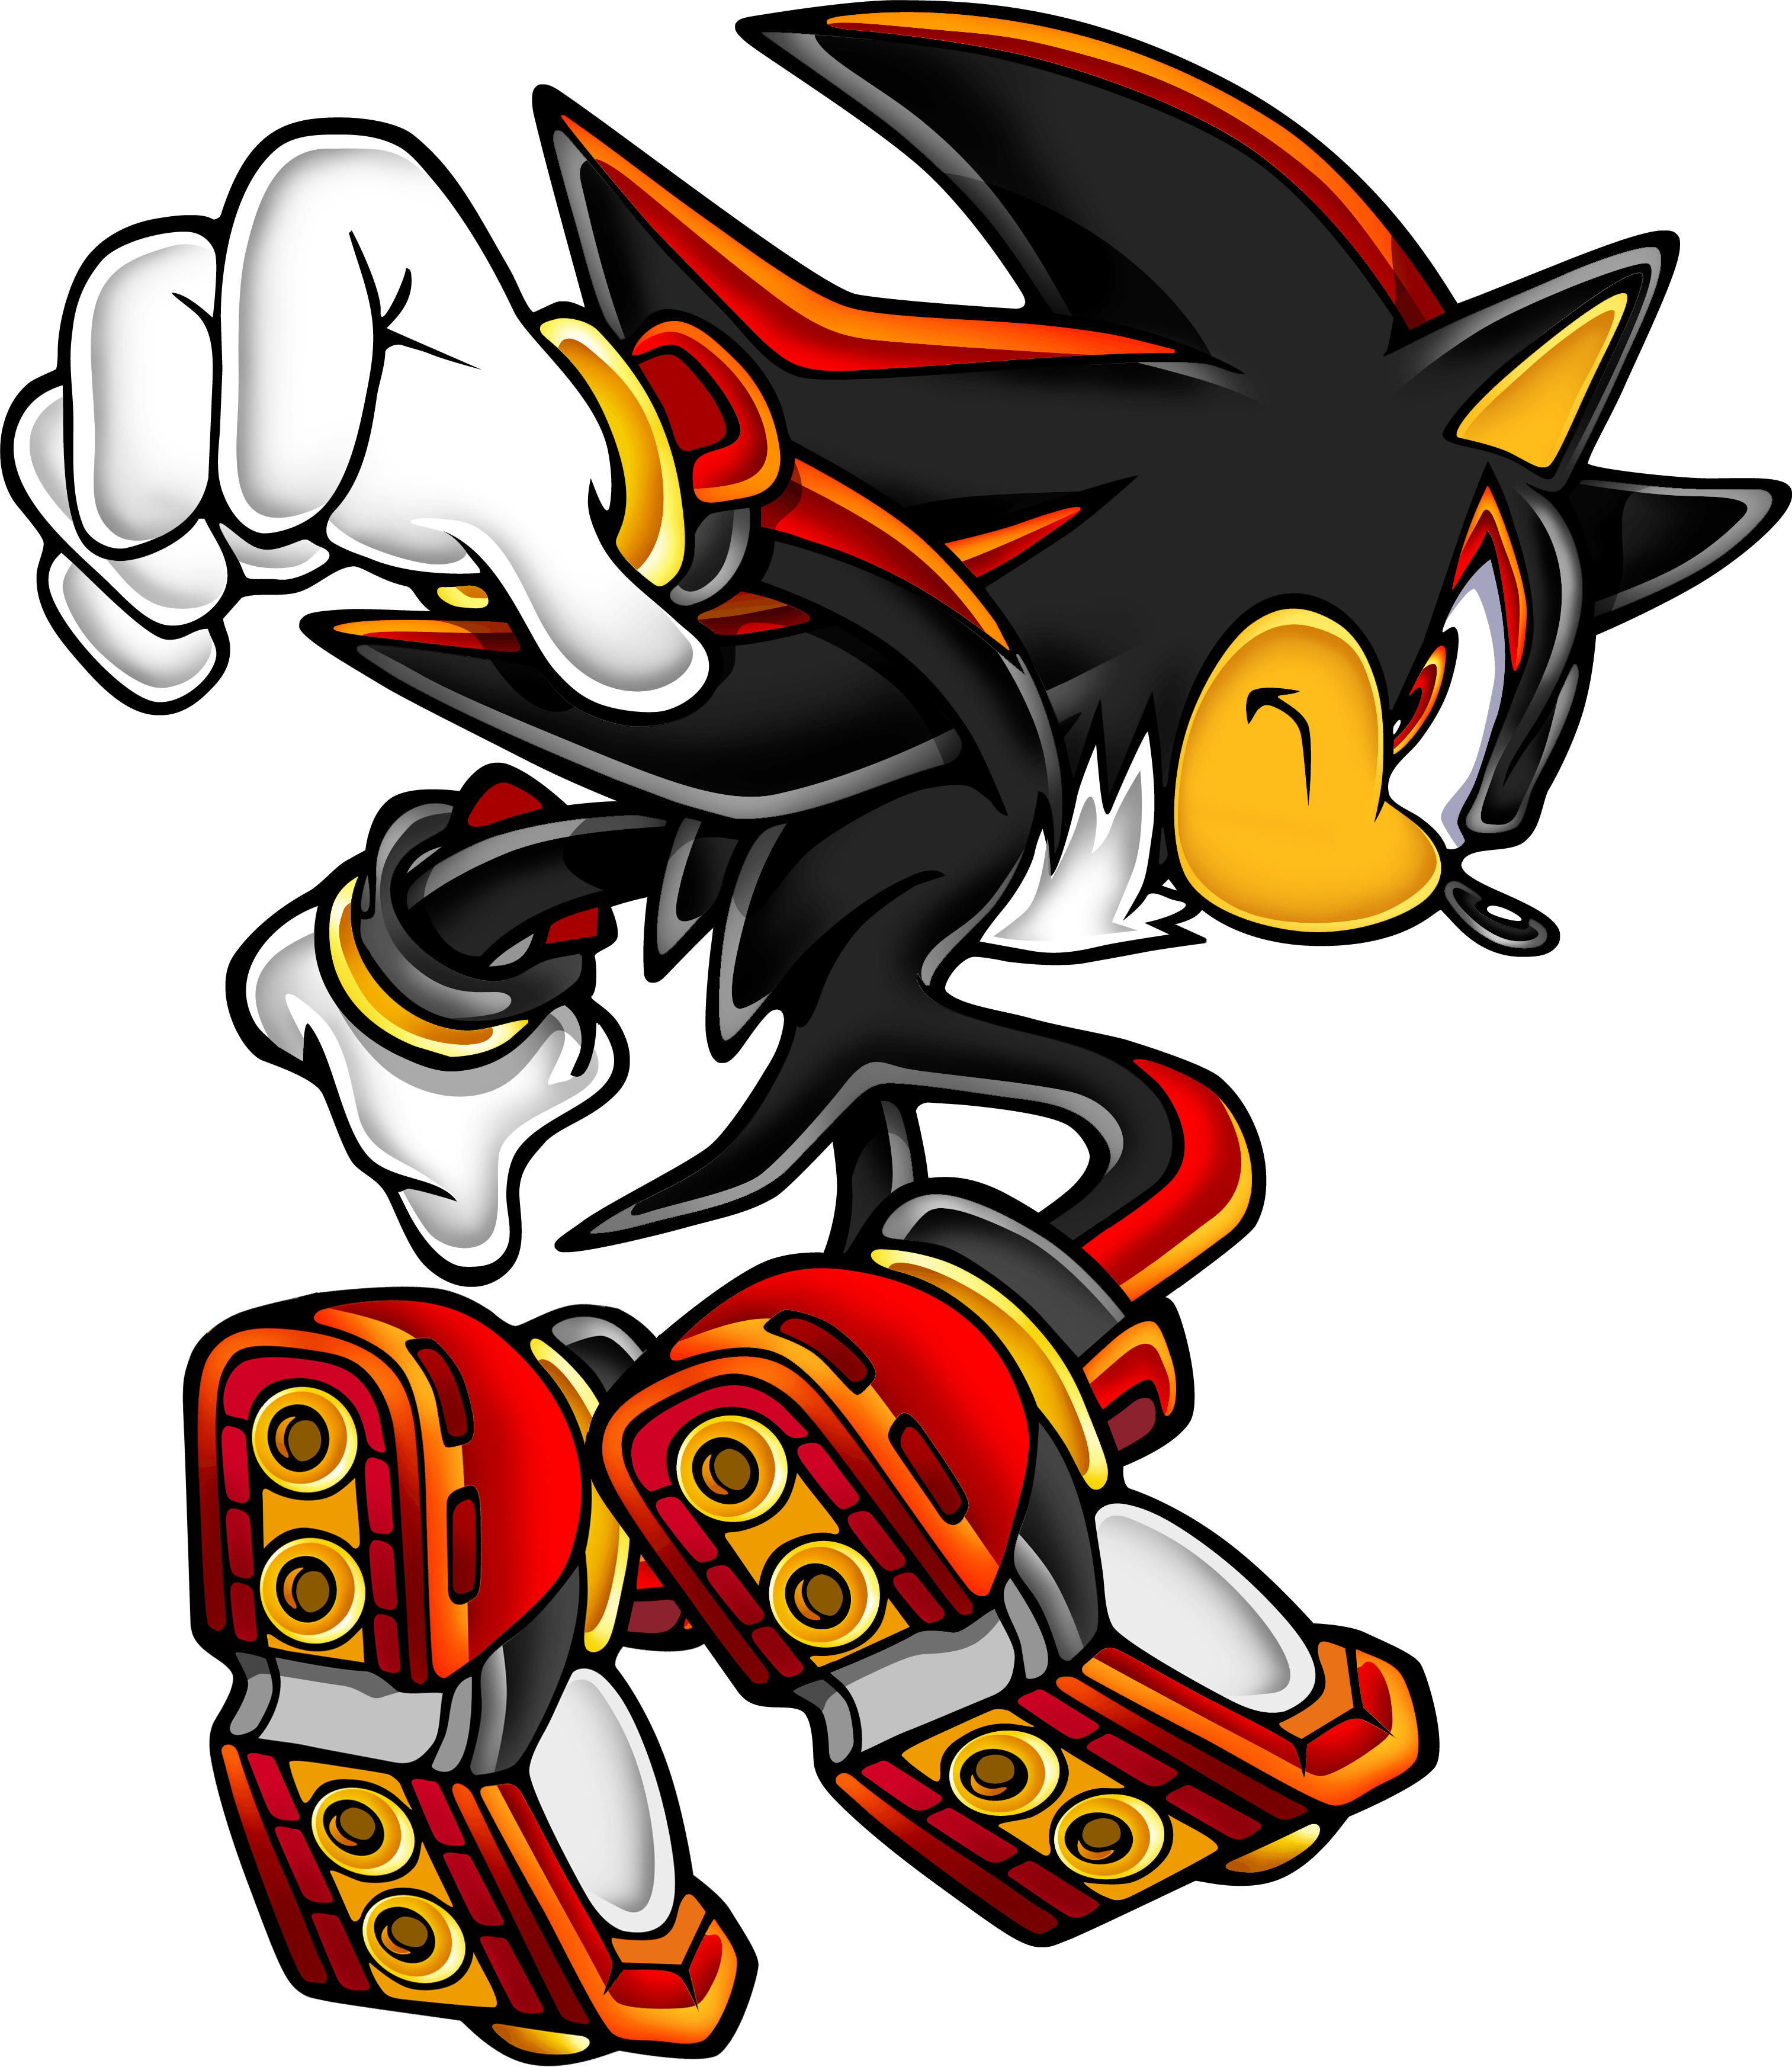 shadow the hedgehog picture. Best Shadow The Hedgehog Wallpaper